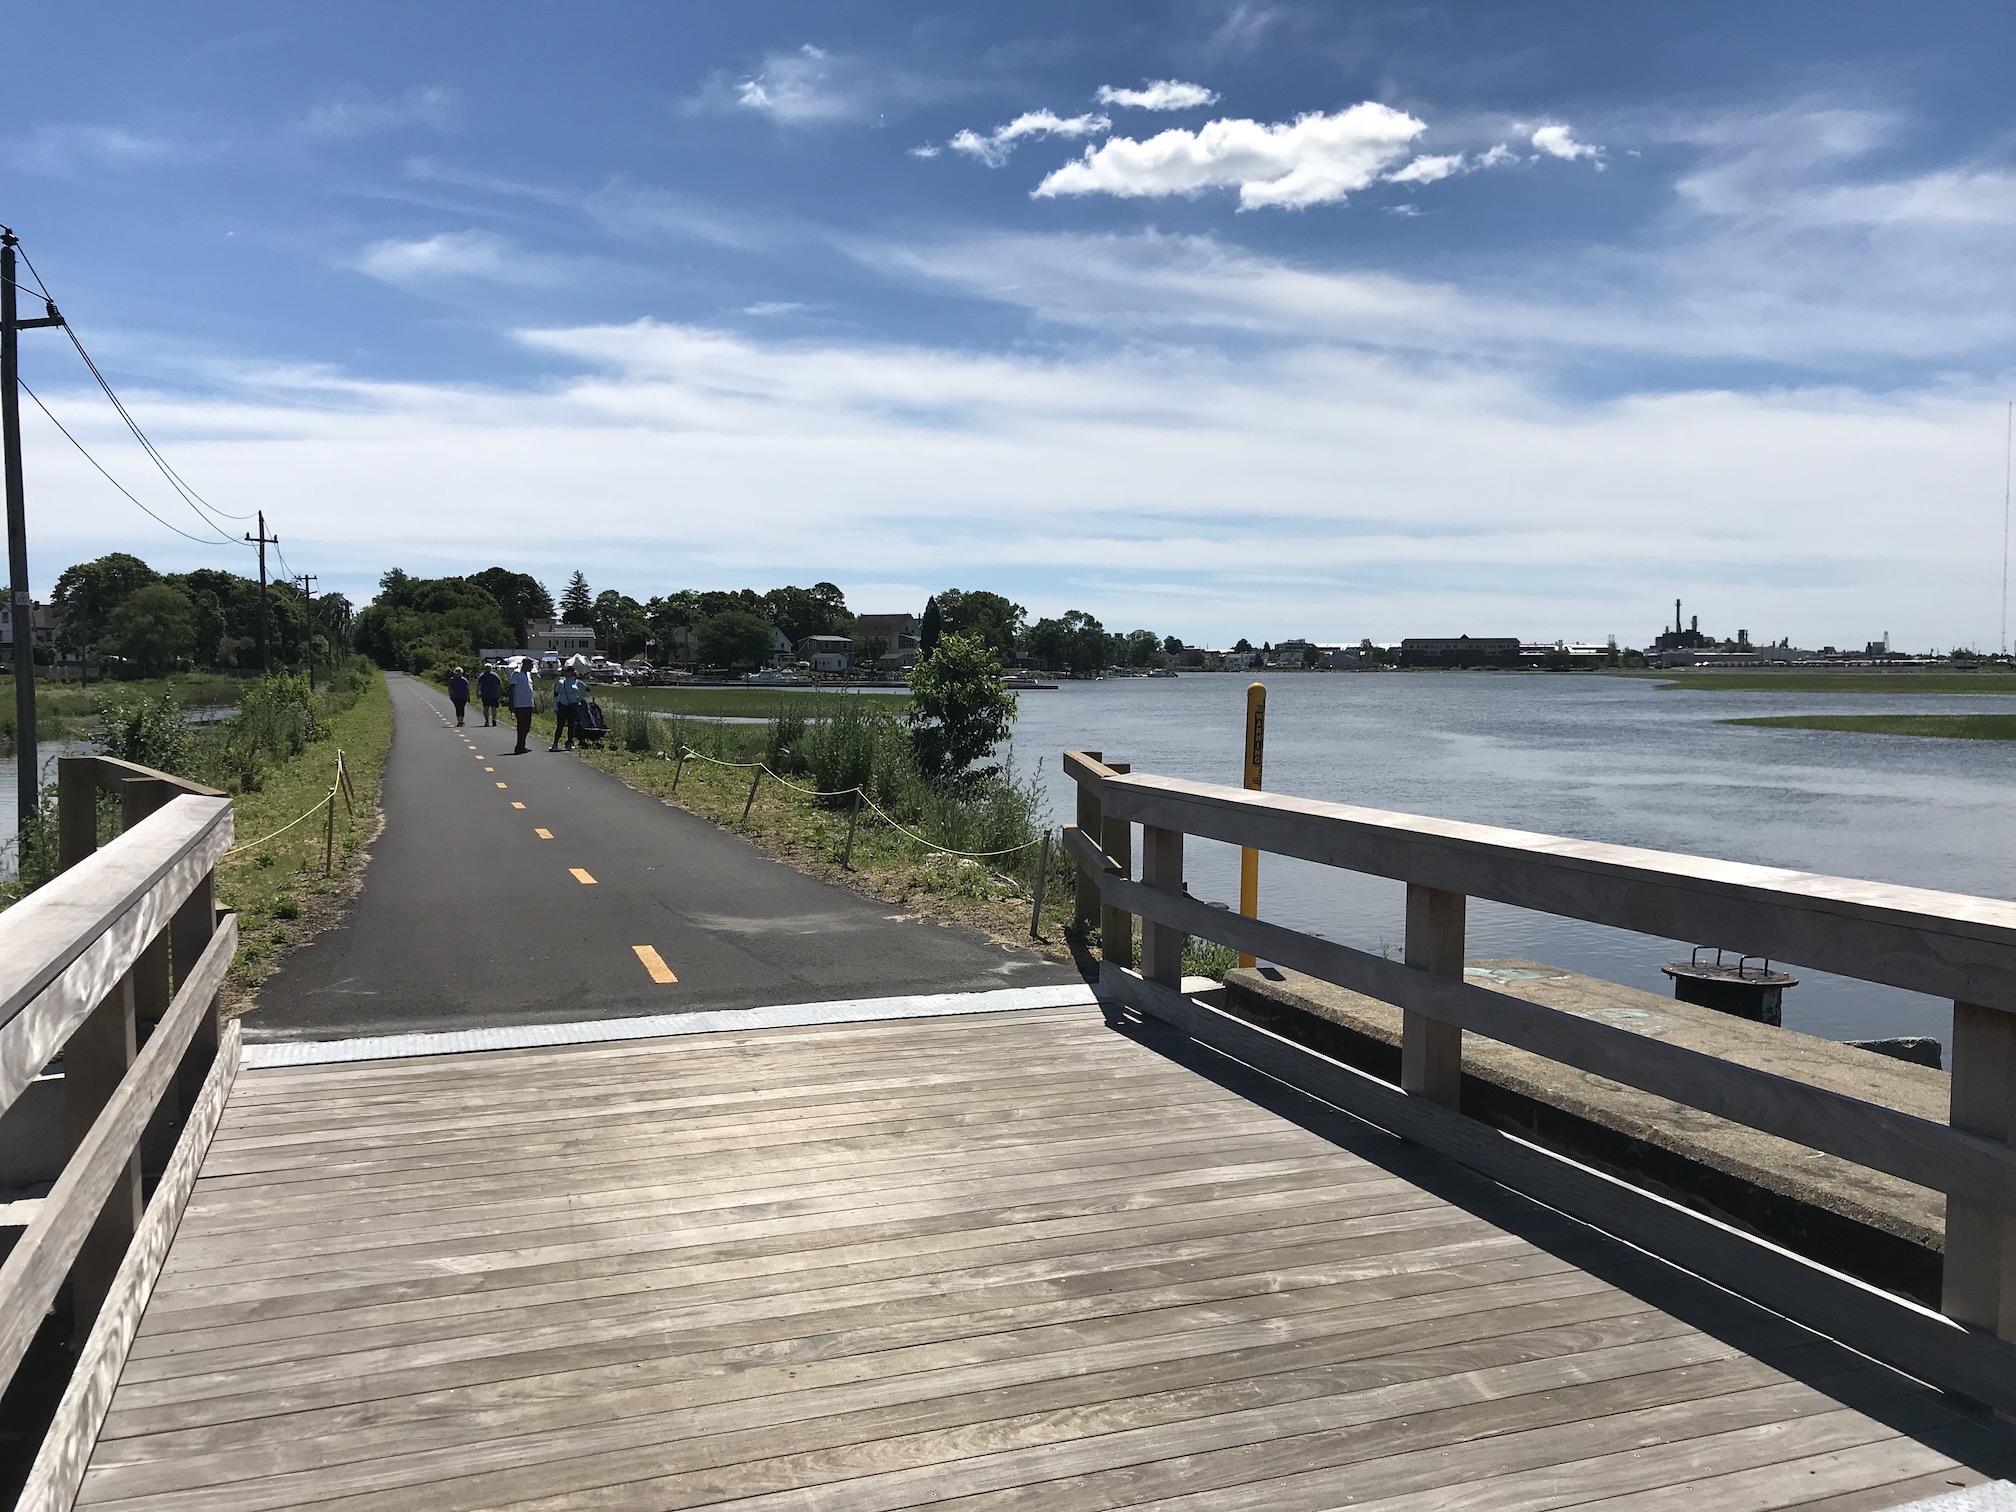 Views of the Saugus River marshes along the new Northern Strand Trail in West Lynn.